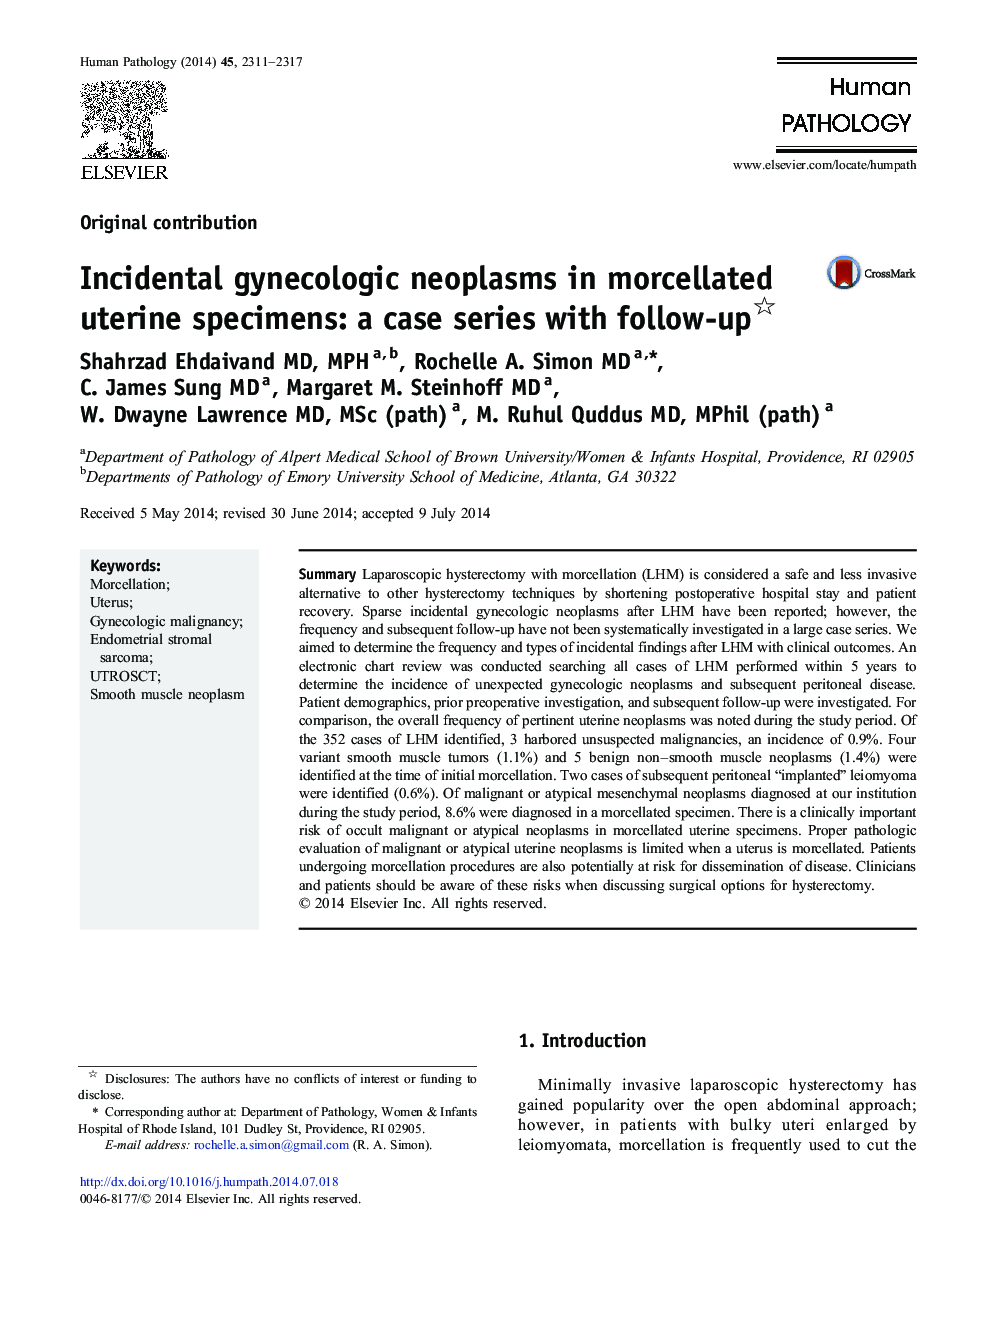 Incidental gynecologic neoplasms in morcellated uterine specimens: a case series with follow-up 